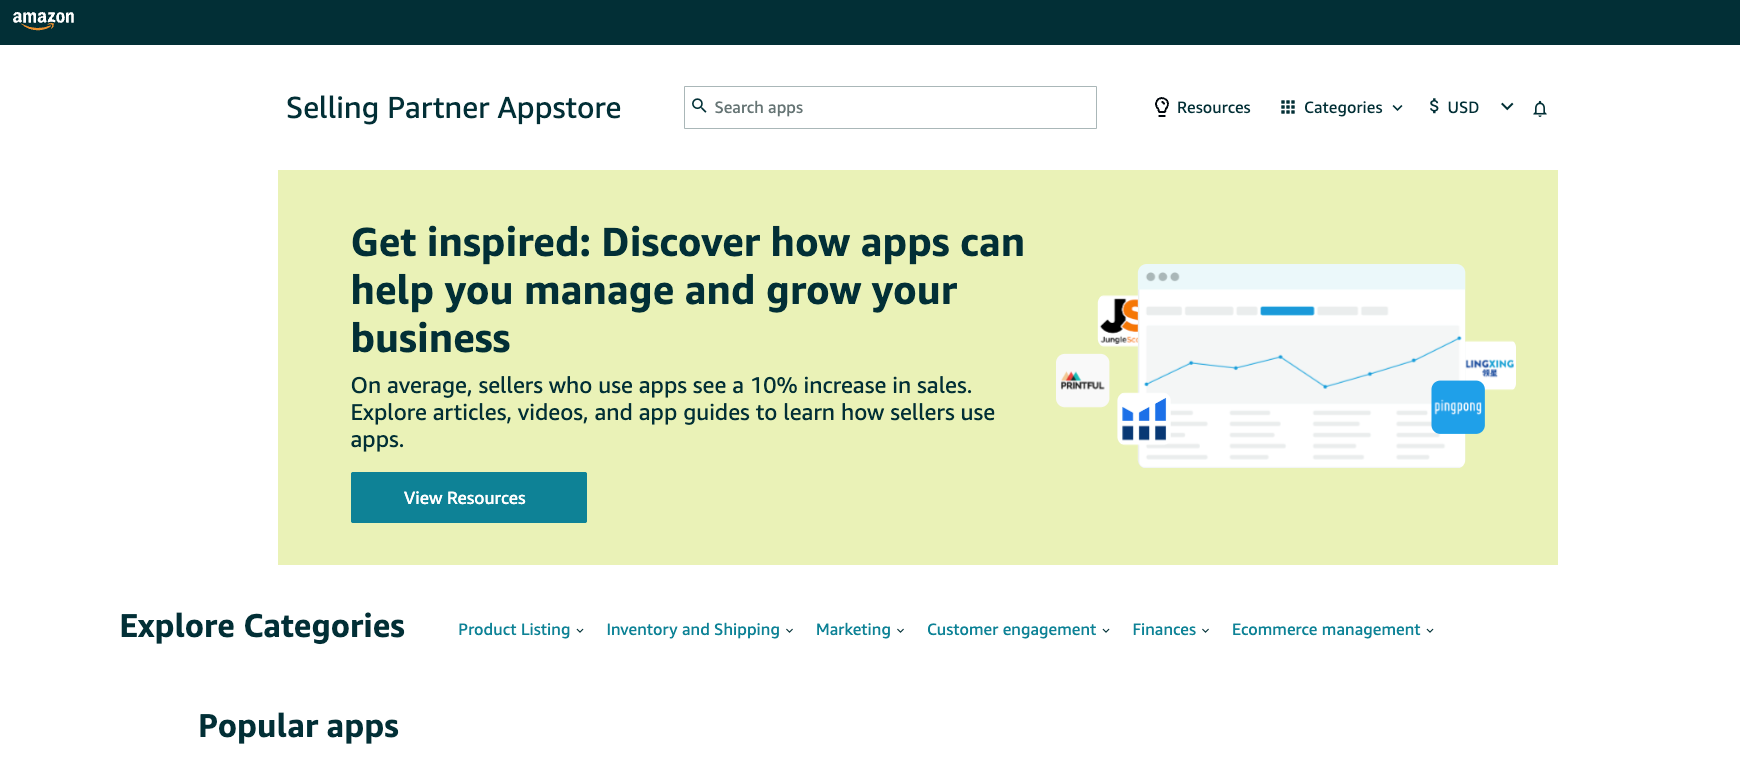 Amazon-Selling-Partner-Appstore-Dashboard